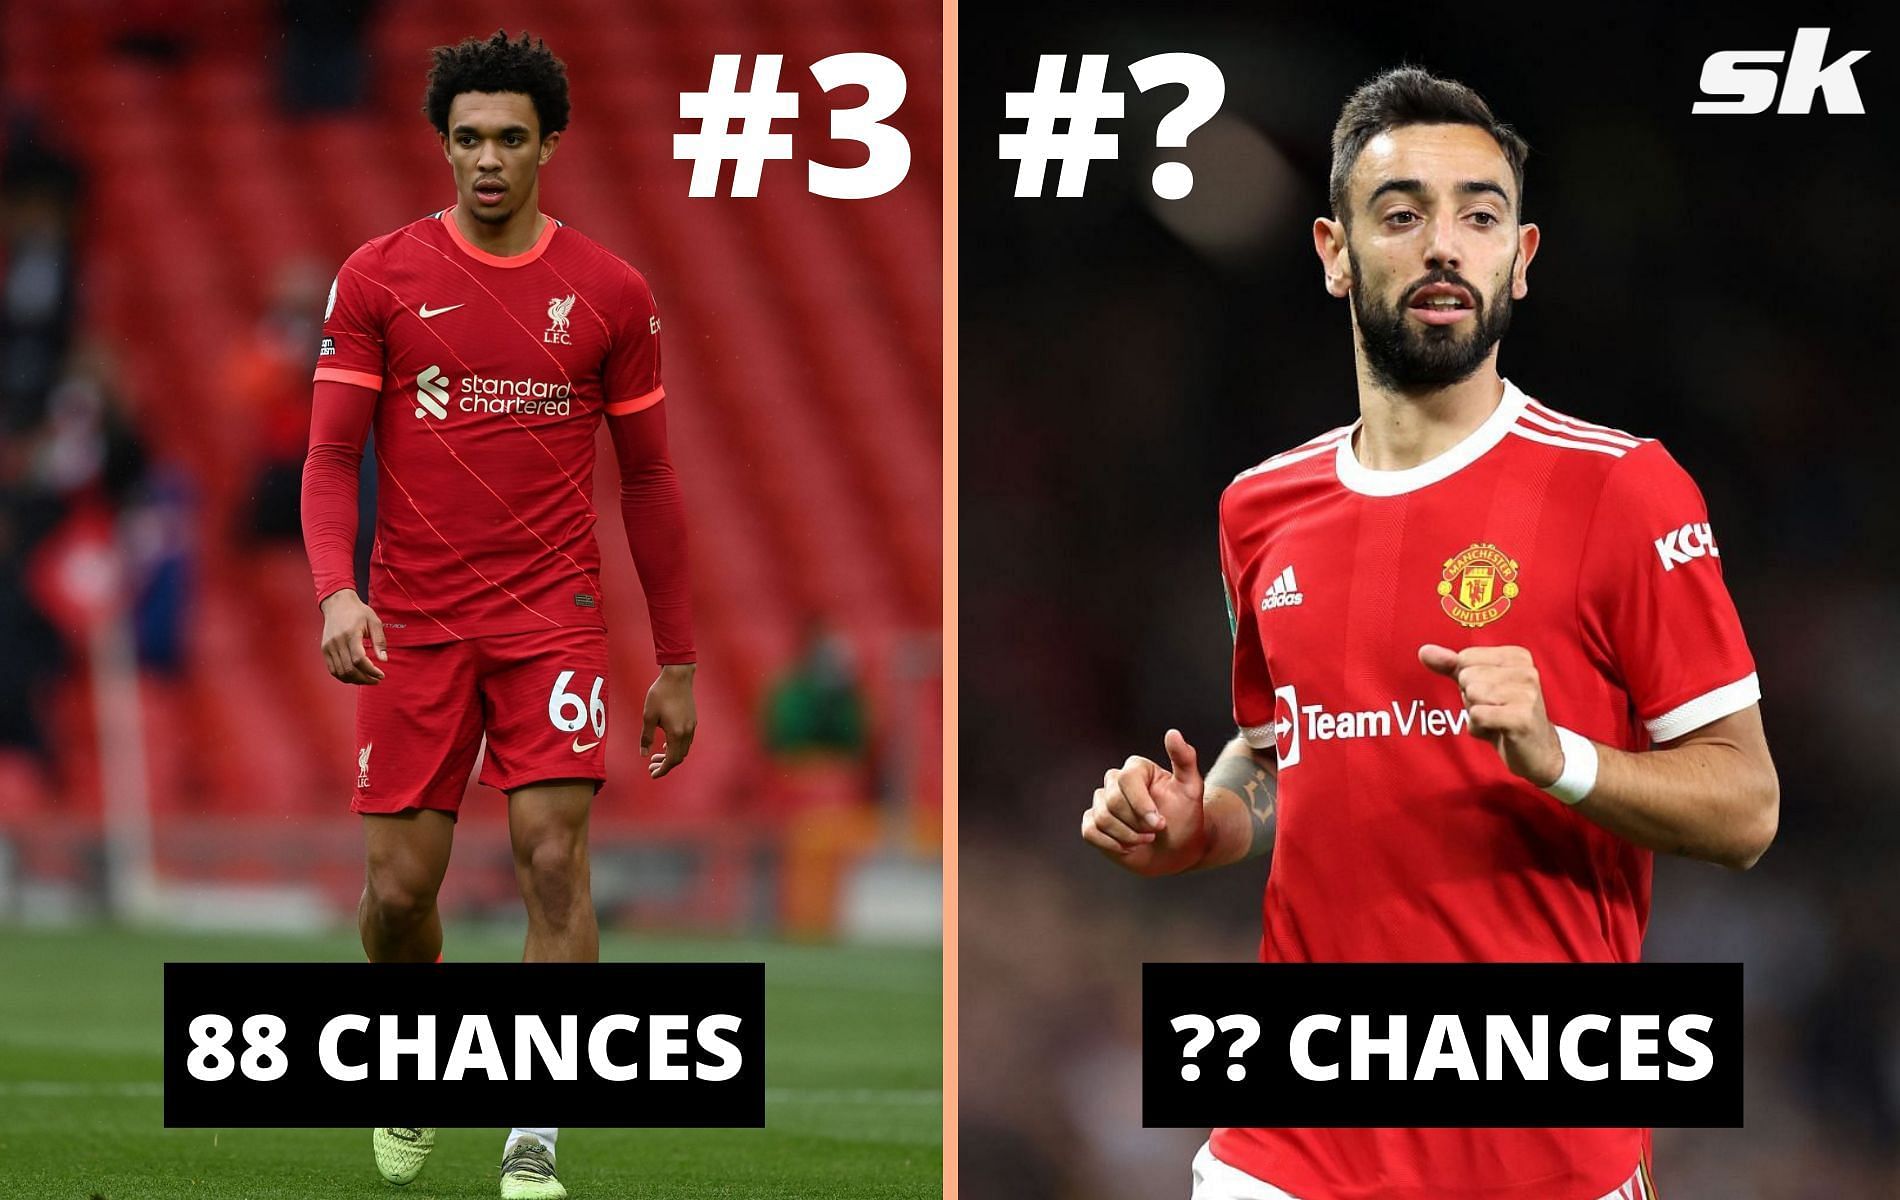 Bruno Fernandes has created the most chances in 2021